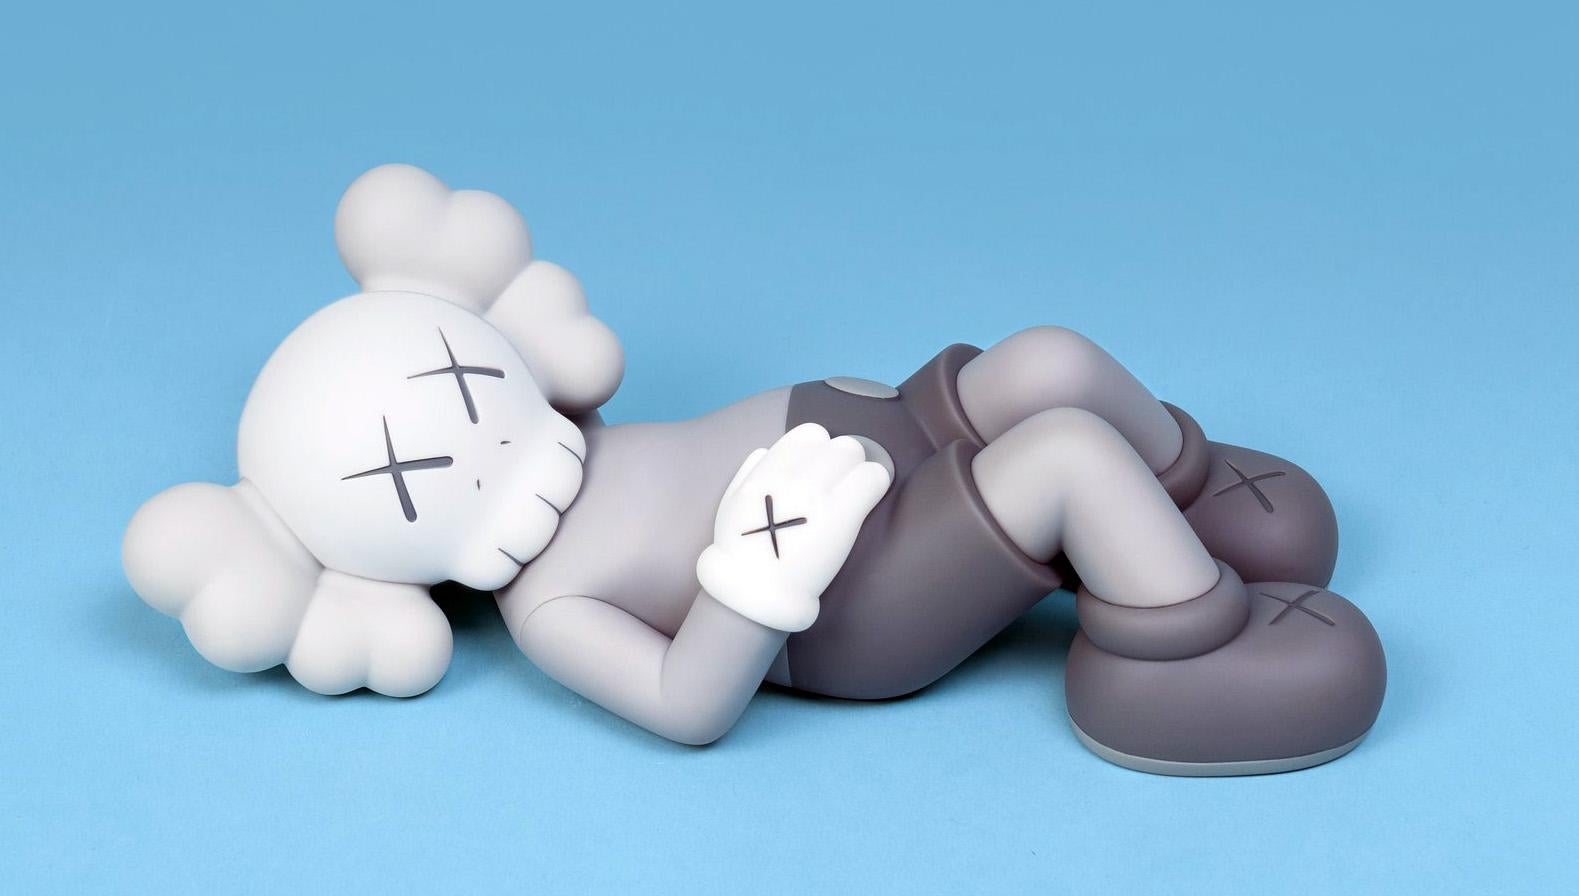 KAWS Grey Holiday Companion Japan (KAWS Mount Fuji Japan):
This sold out KAWS figurative piece features KAWS' signature character COMPANION in a resting position. Published by All Rights Reserved to commemorate the debut of KAWS’ 40-meters-long